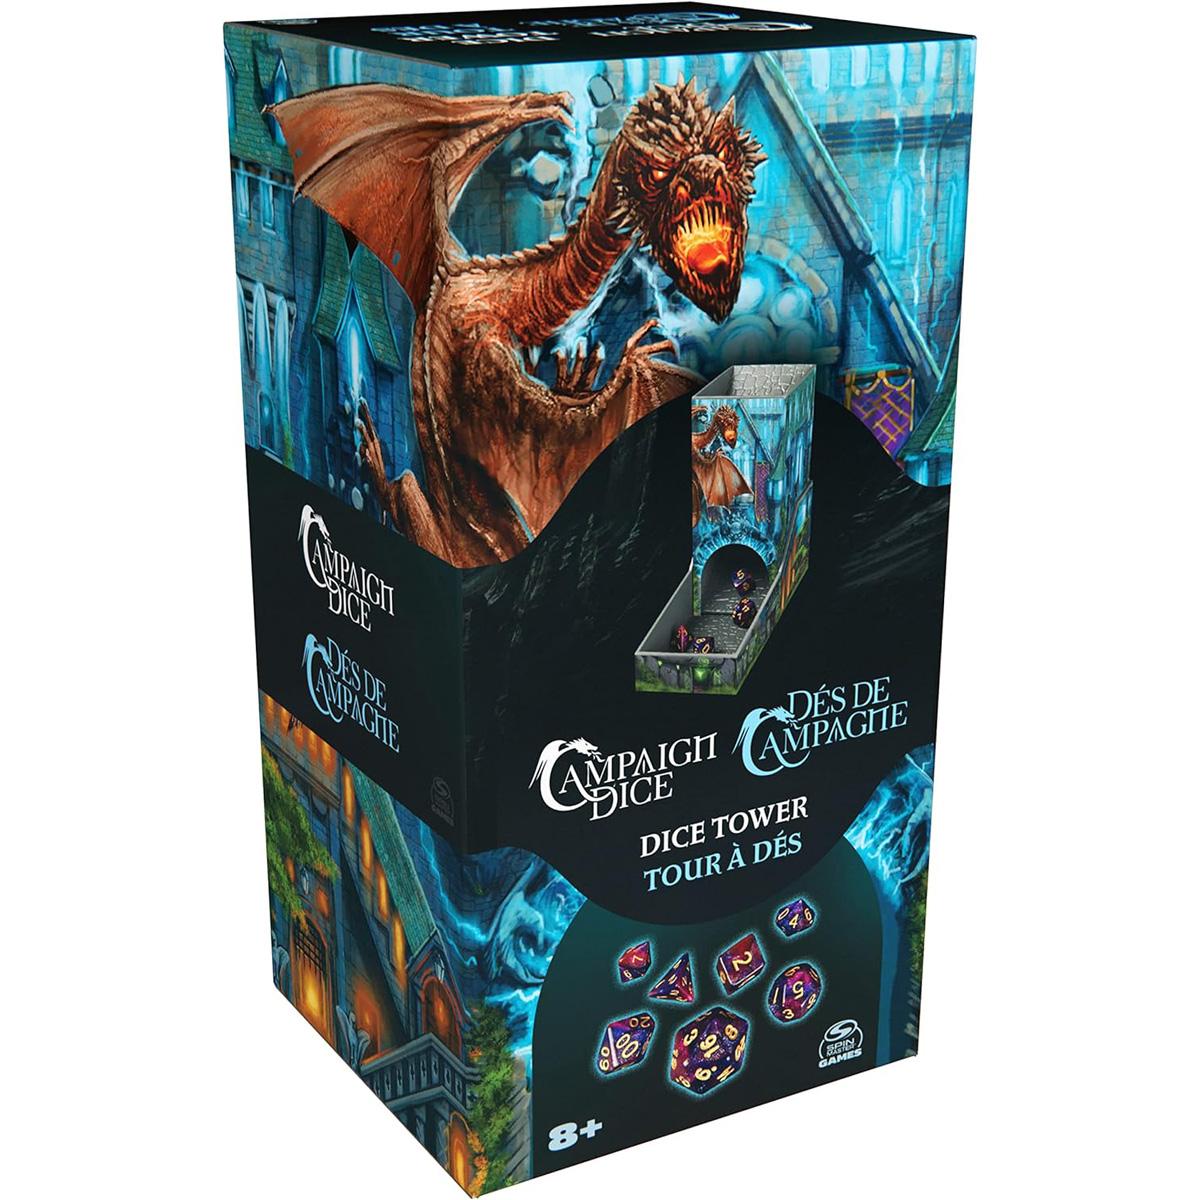 Campaign Dice Tower Dice Role-Playing Board Games for $5.70